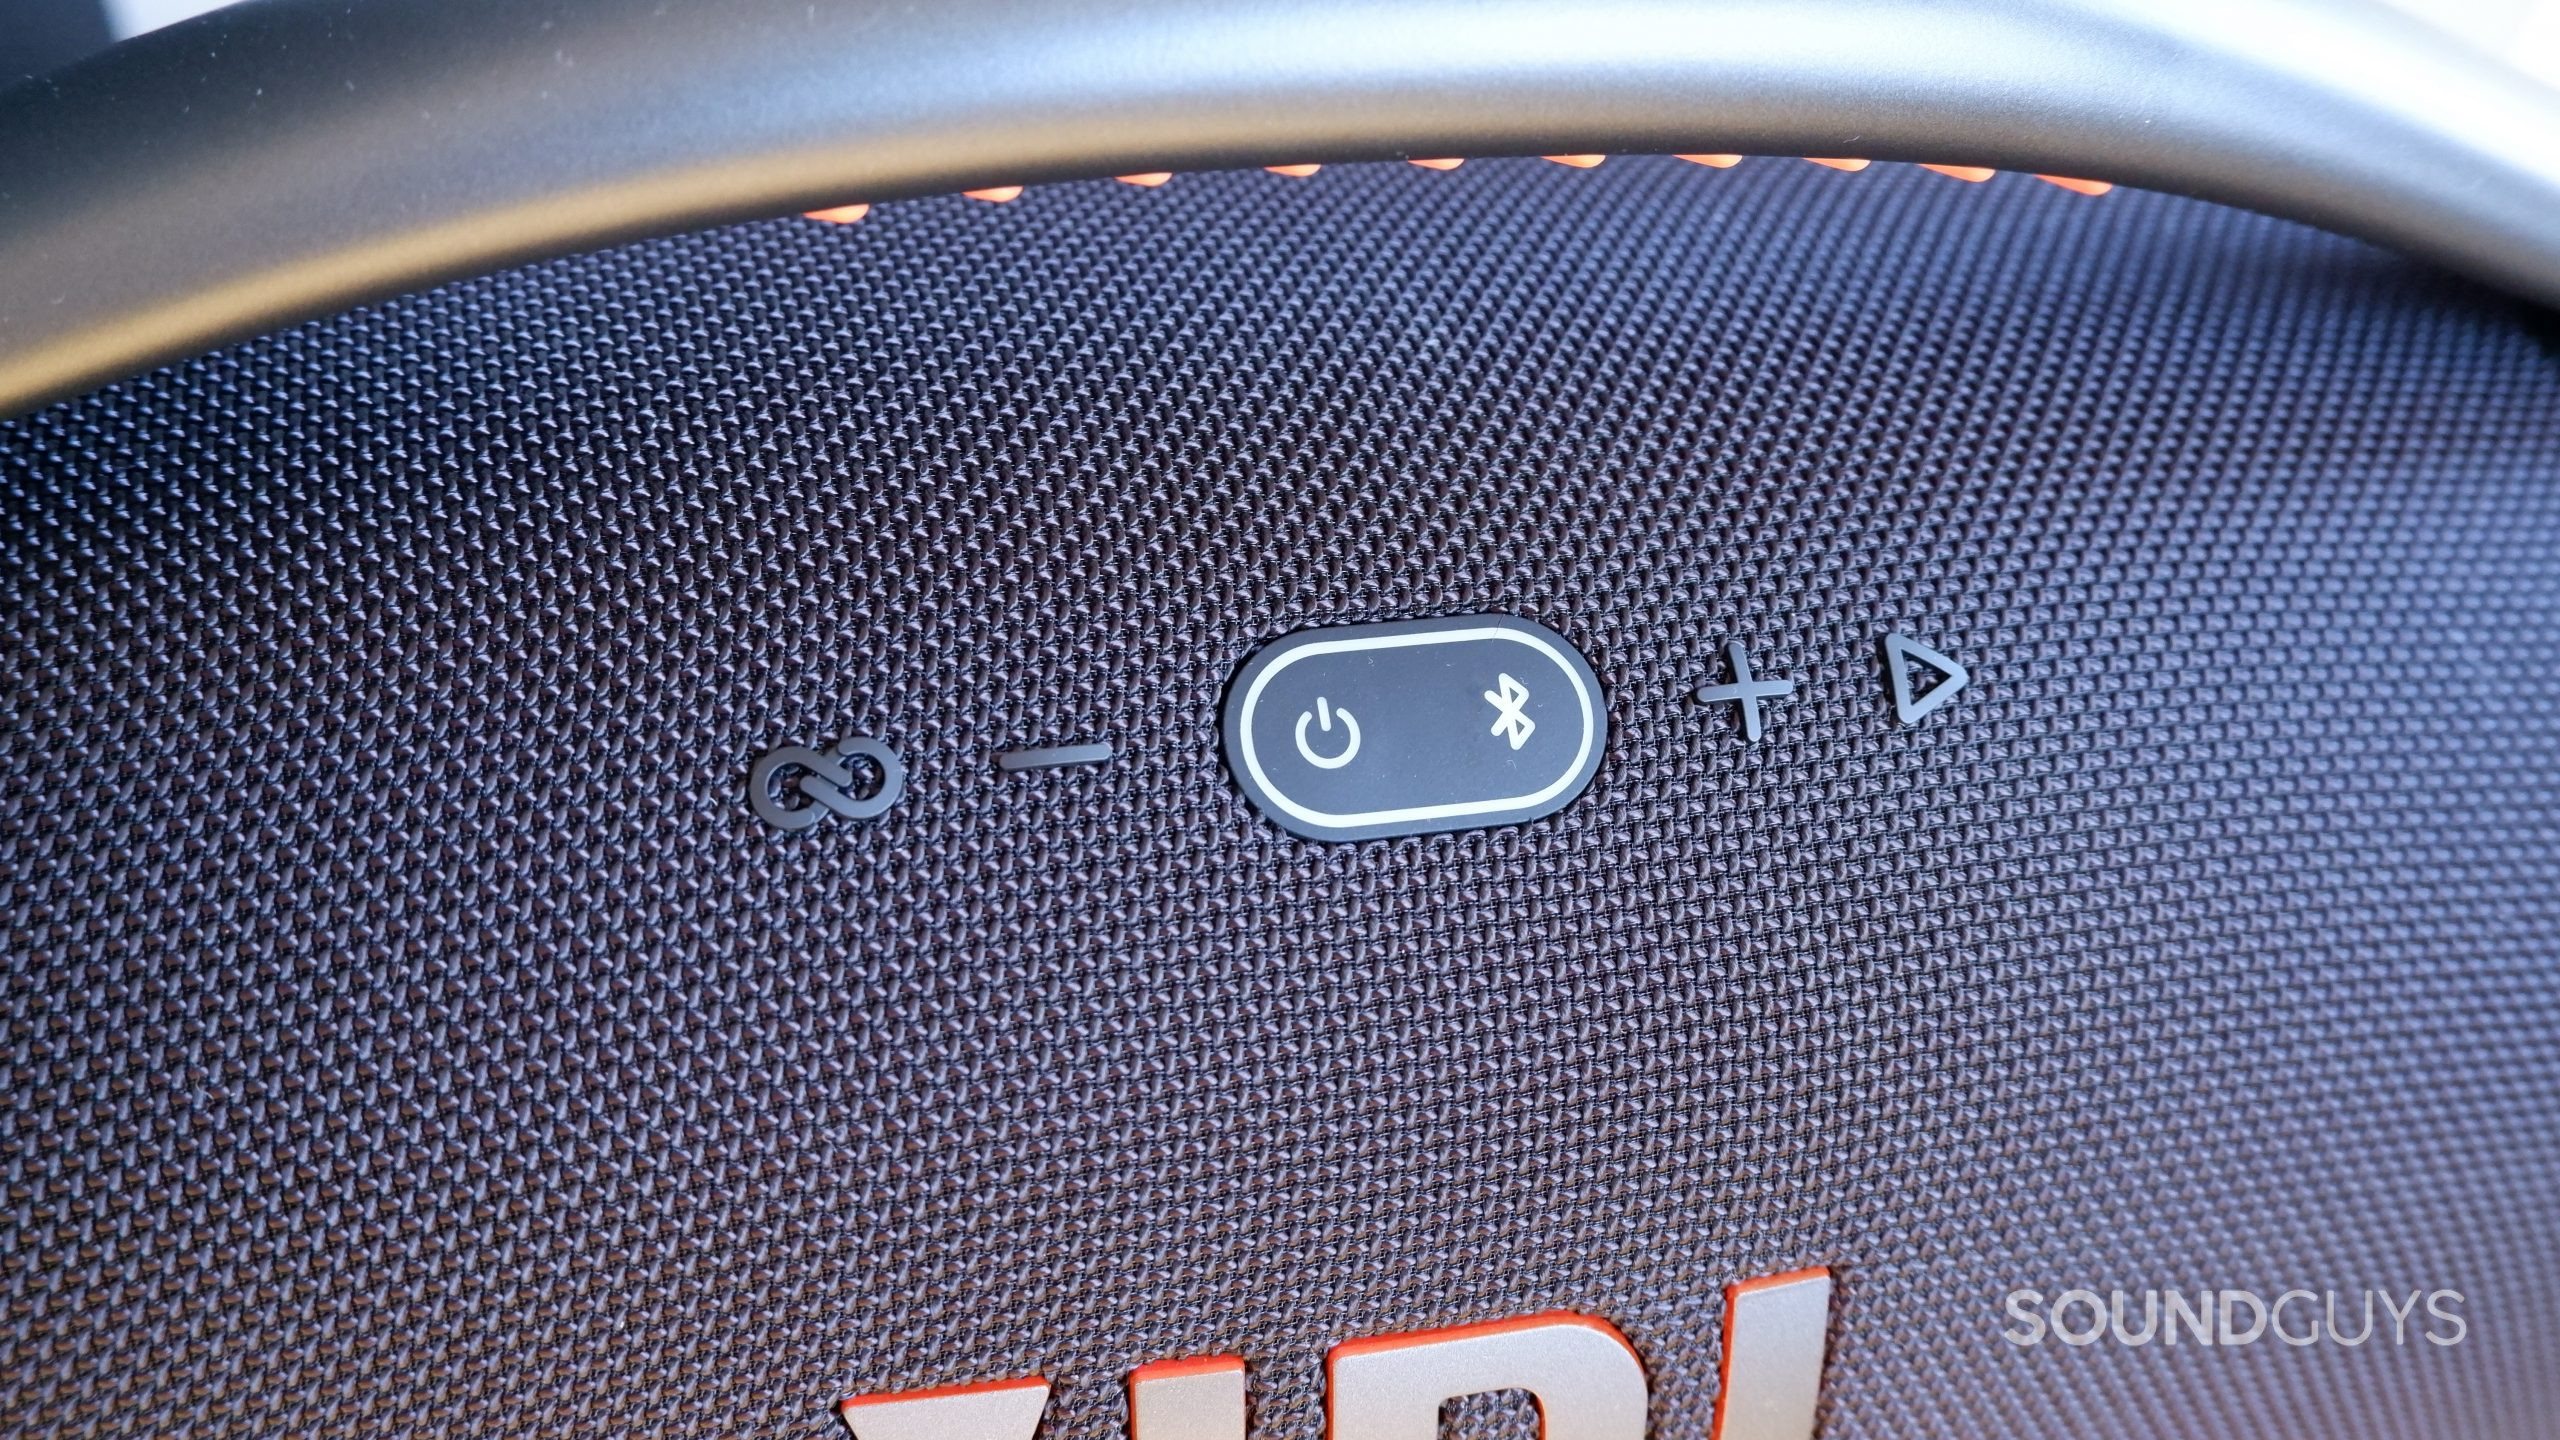 The controls buttons on the JBL Boombox 3.